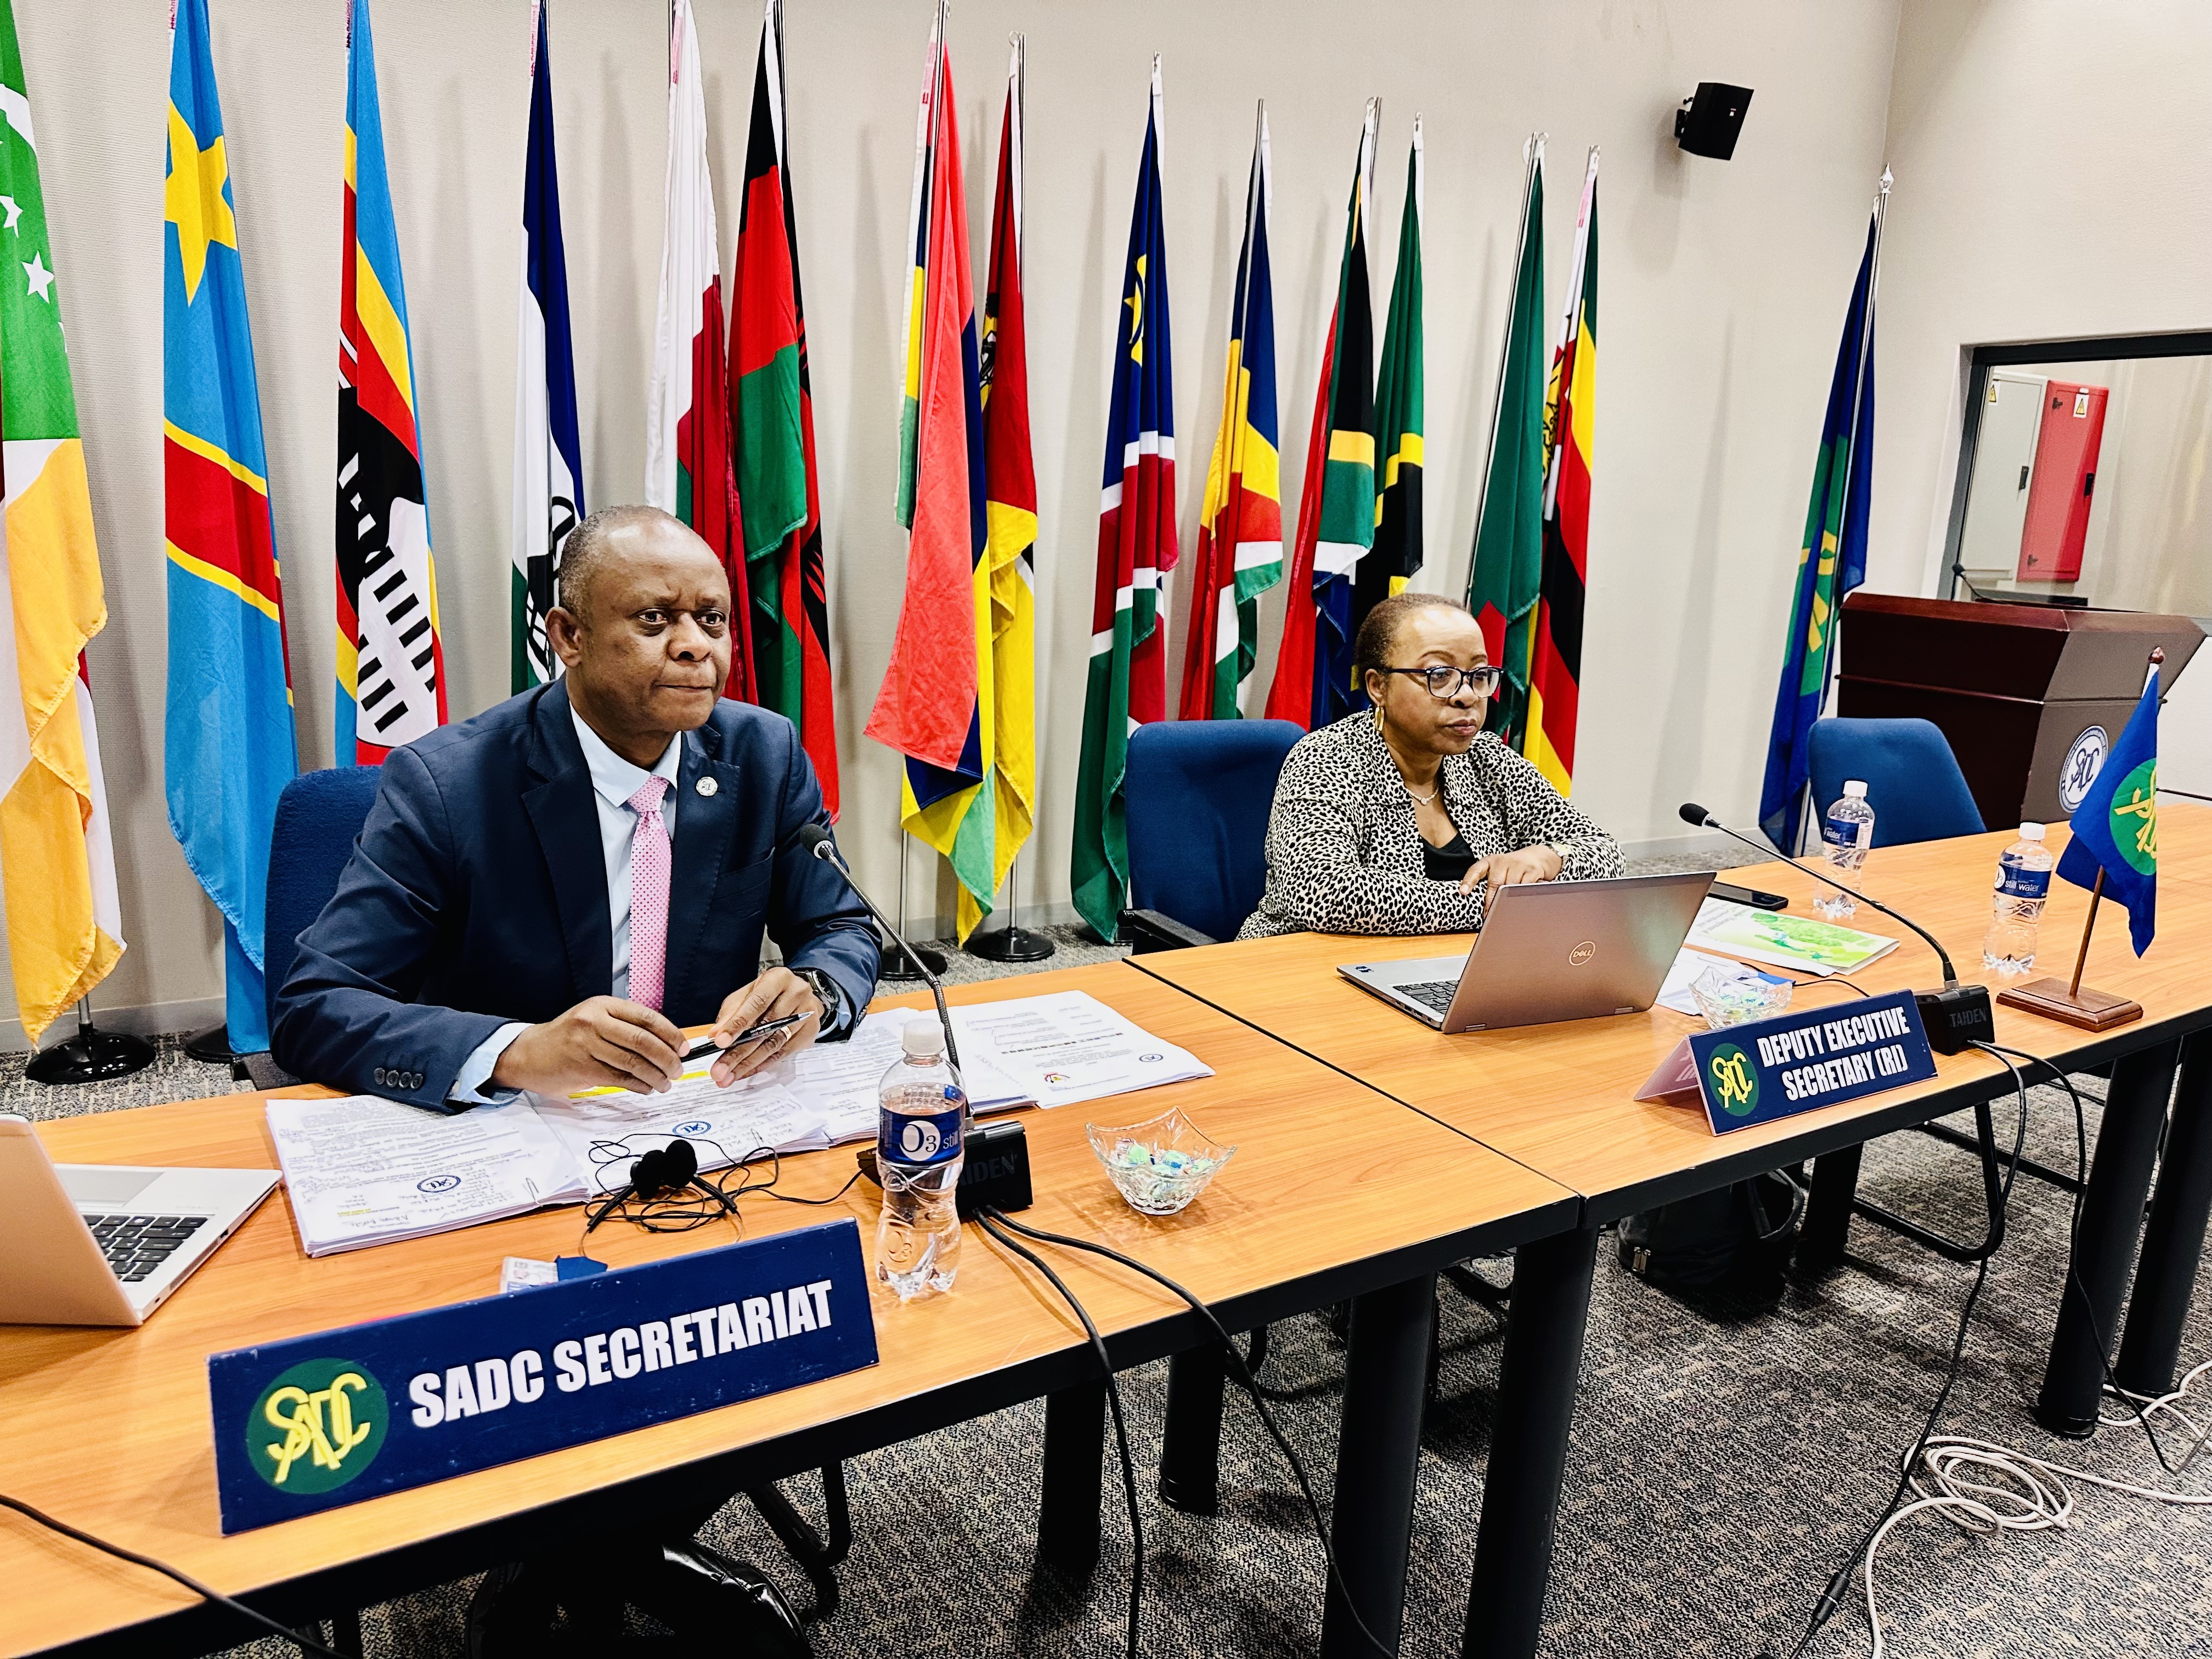 SADC Ministers responsible for Agriculture, Food Security, Fisheries and Aquaculture review progress on implementation of relevant sectoral programmes, and strategies